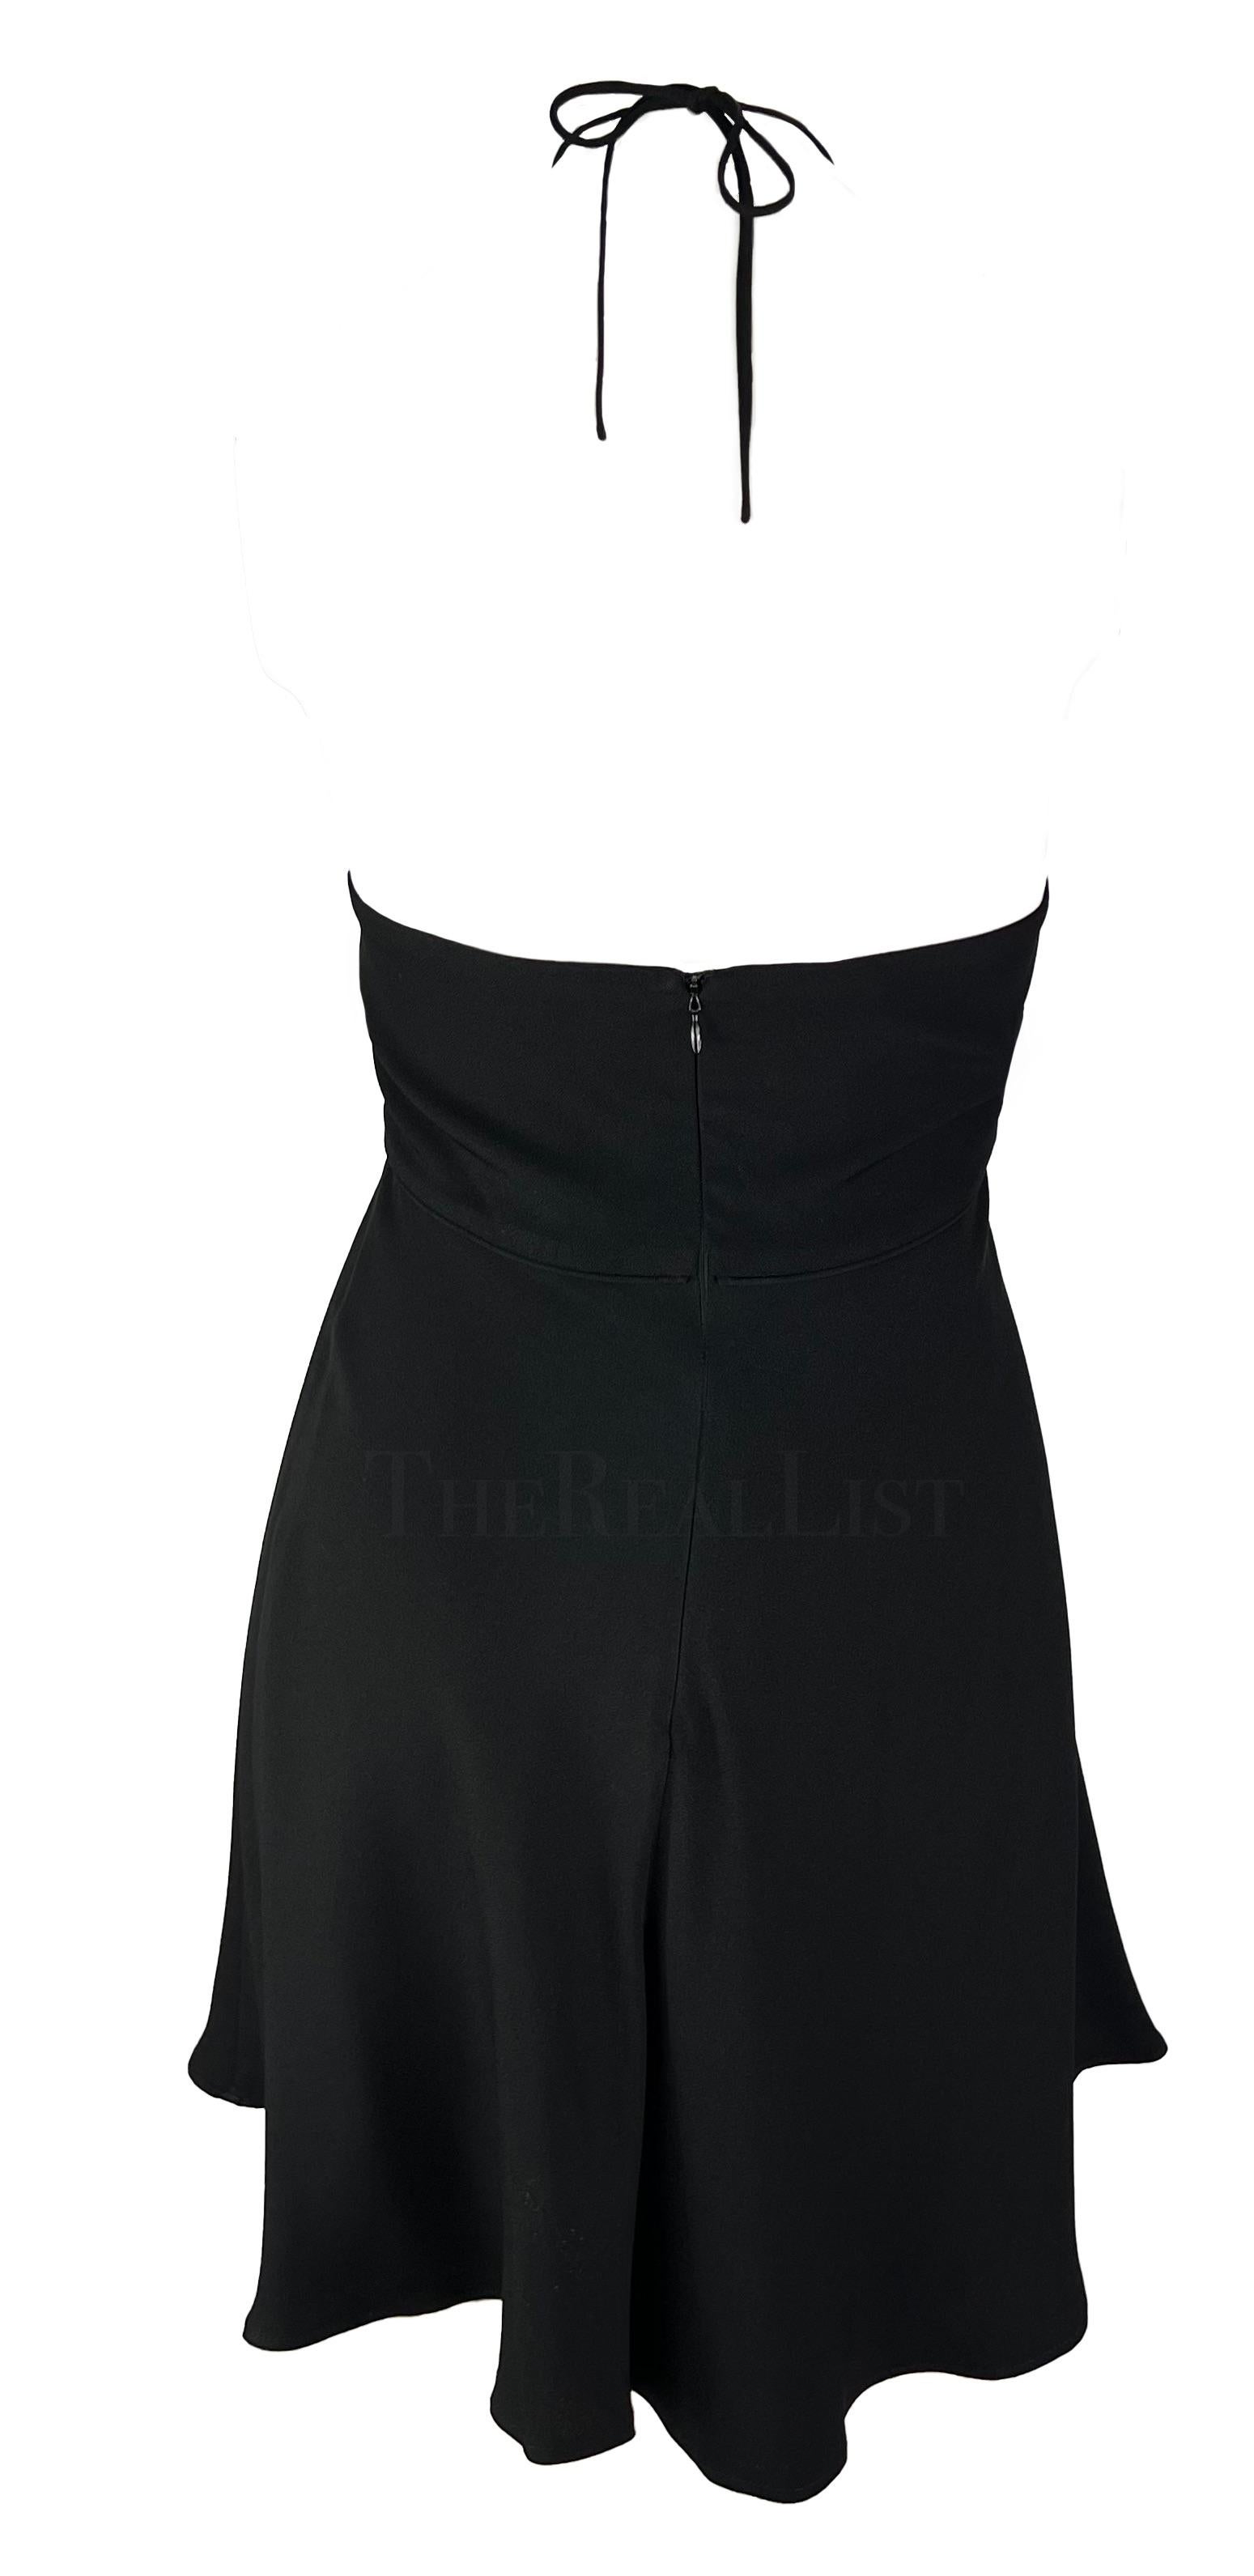 S/S 1995 Dolce & Gabbana Black Bow Halterneck Flare Mini Dress In Excellent Condition For Sale In West Hollywood, CA